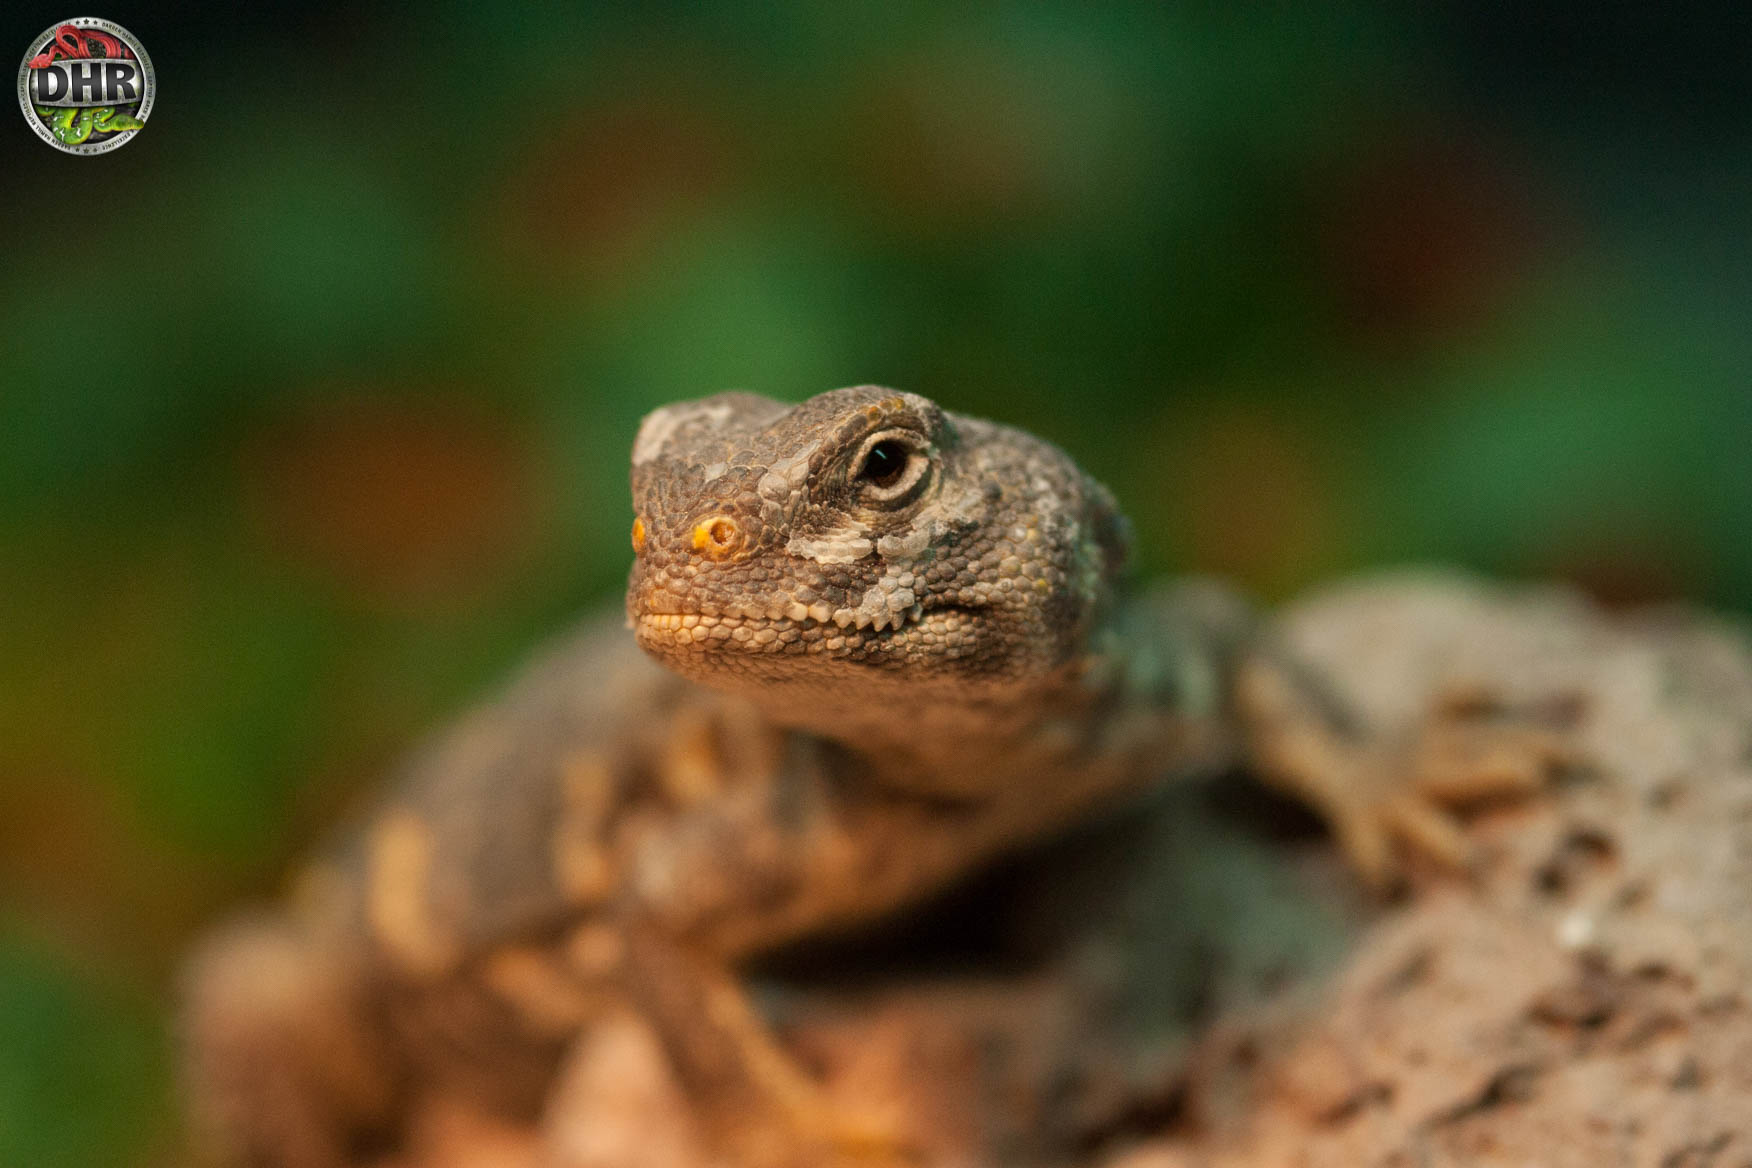 How about those Uromastyx!